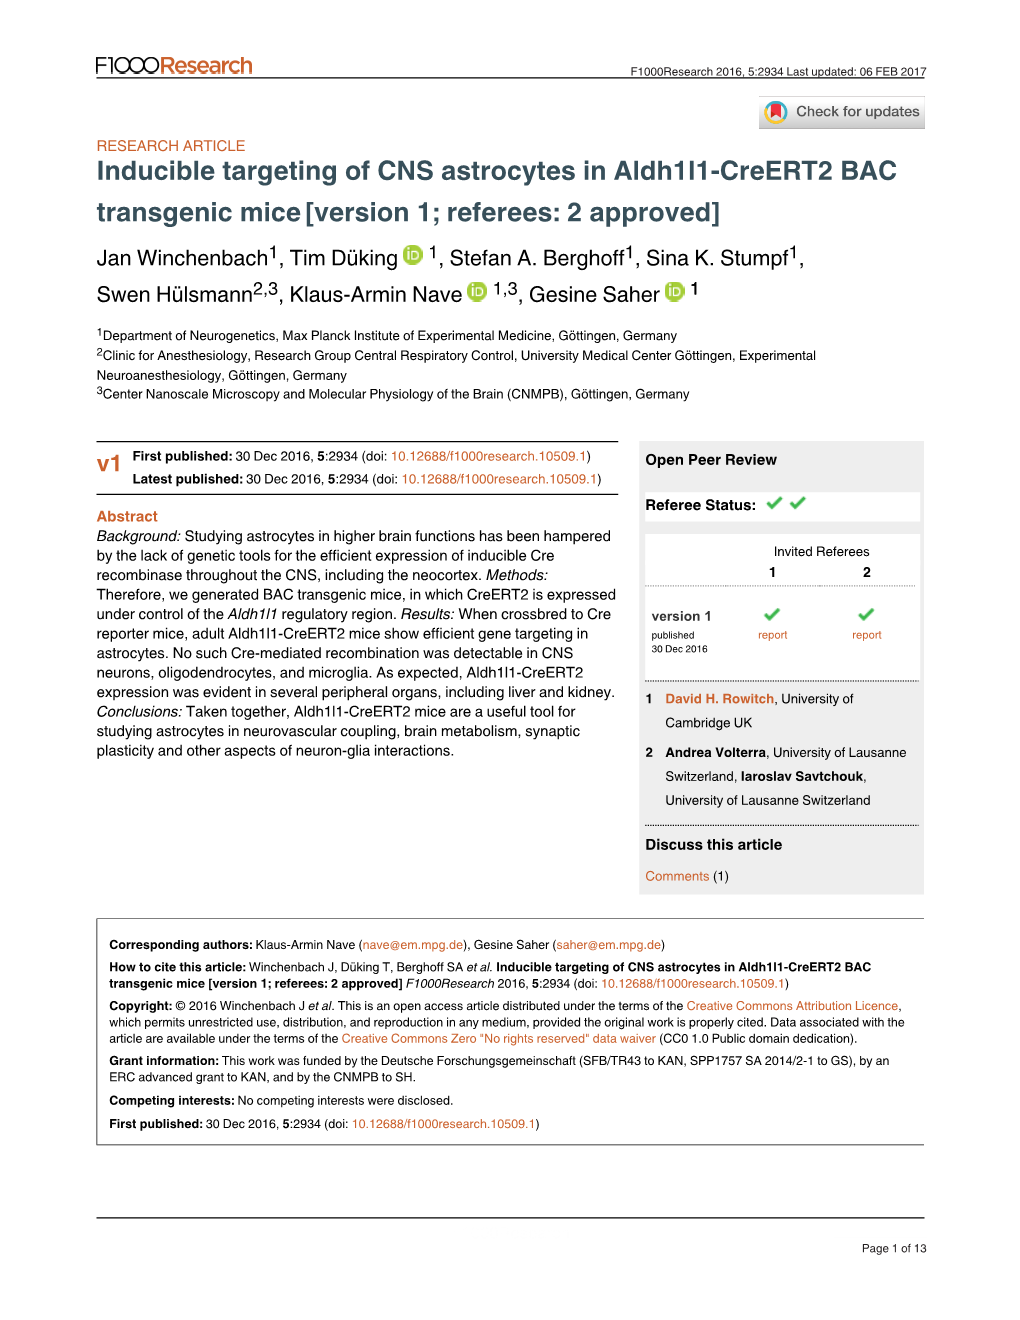 Inducible Targeting of CNS Astrocytes in Aldh1l1-Creert2 BAC Transgenic Mice [Version 1; Referees: 2 Approved] Jan Winchenbach1, Tim Düking 1, Stefan A